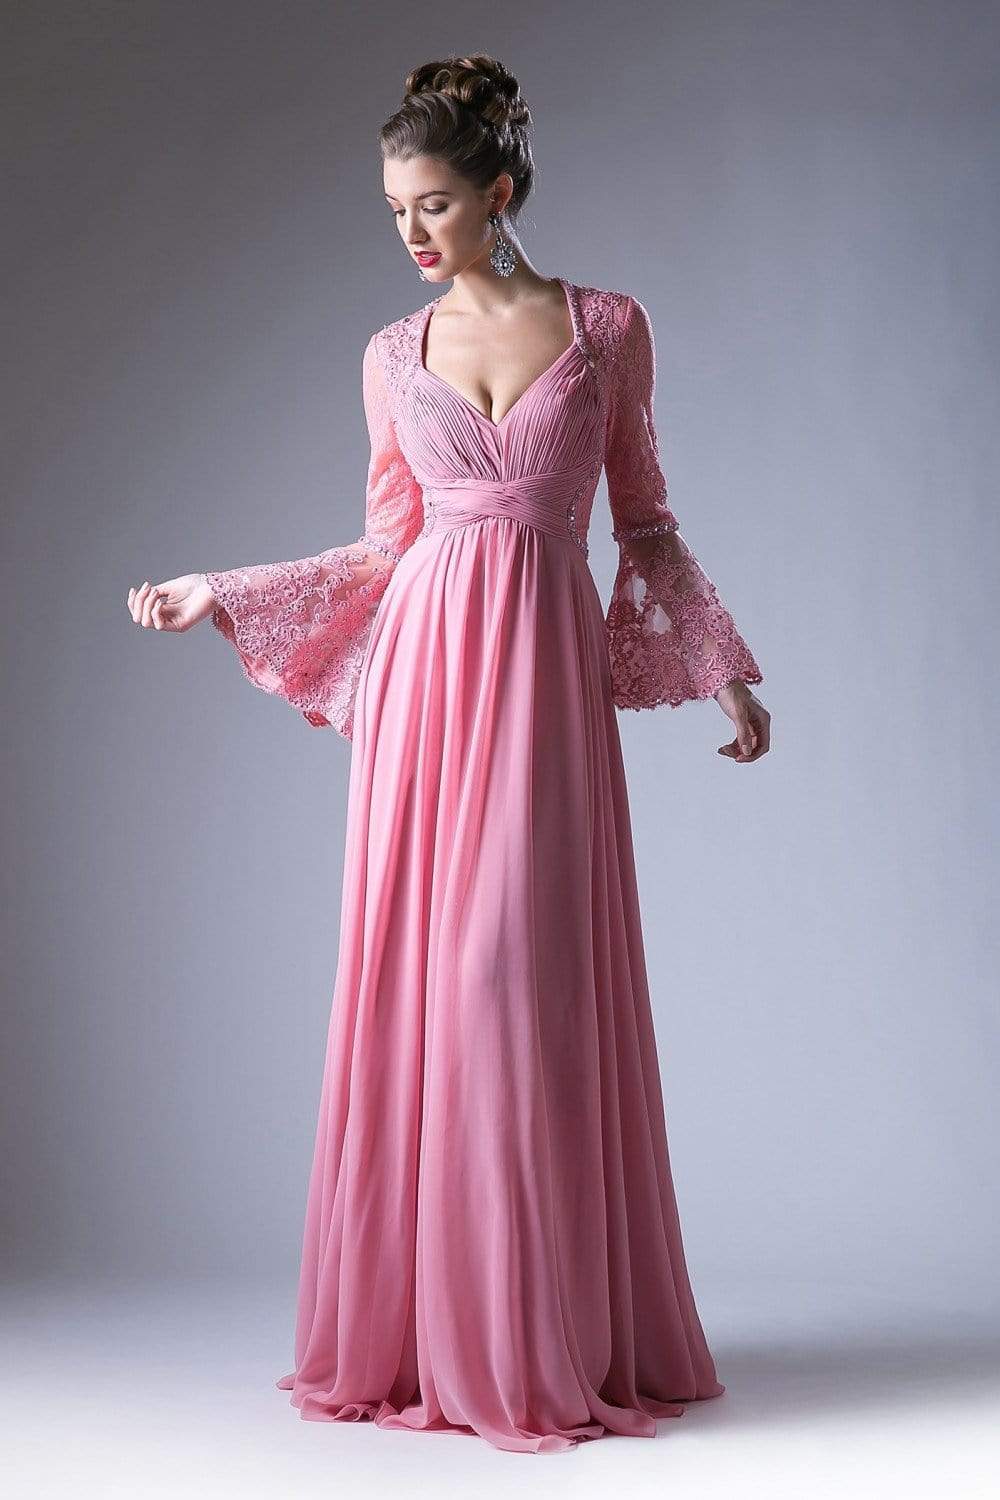 Cinderella Divine - Embellished Lace Long Bell Sleeve A-line Dress Special Occasion Dress 2 / Dusty Rose